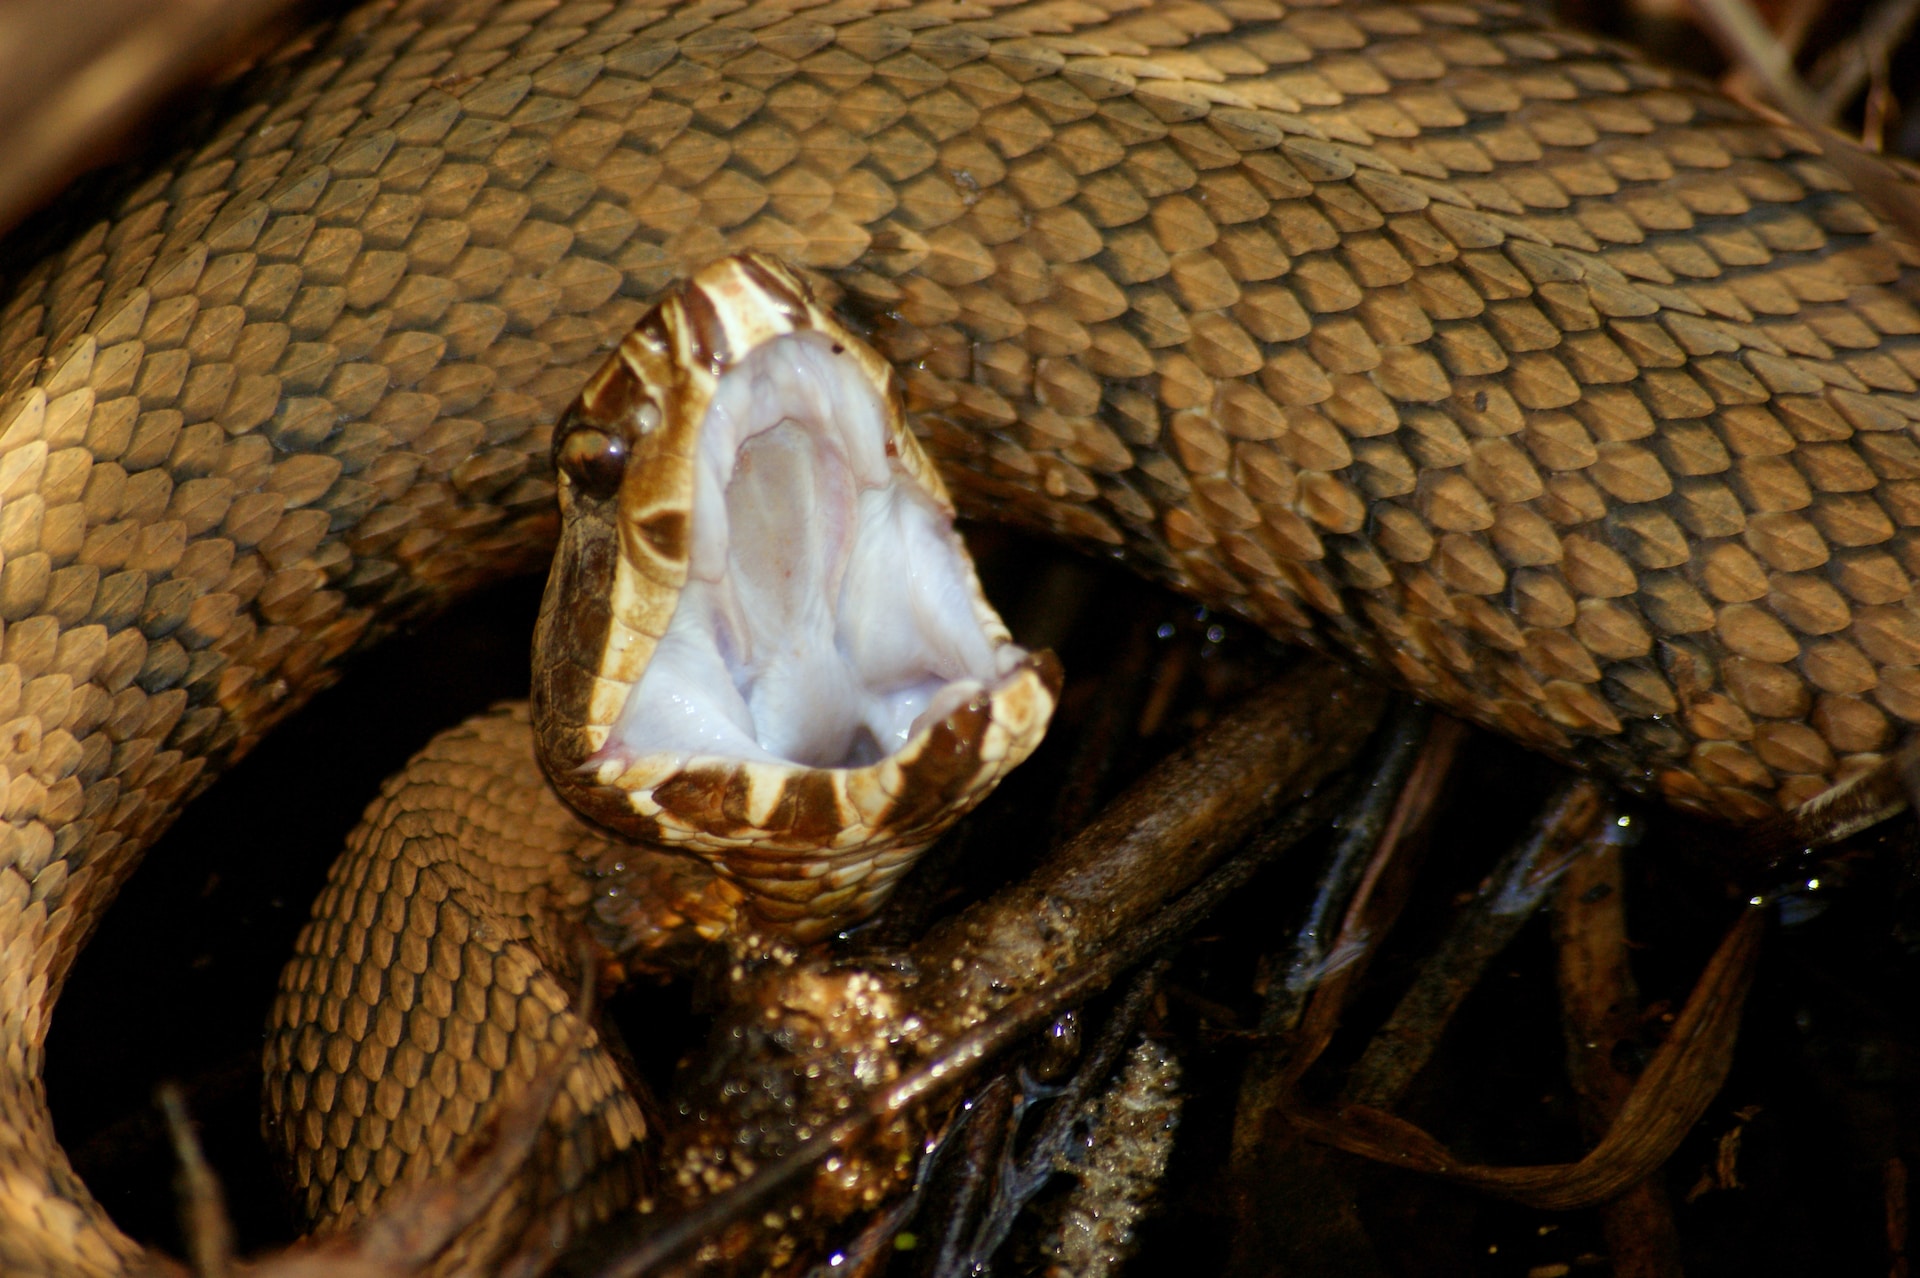 Here is the list of the venomous snakes in South Carolina that you should avoid.